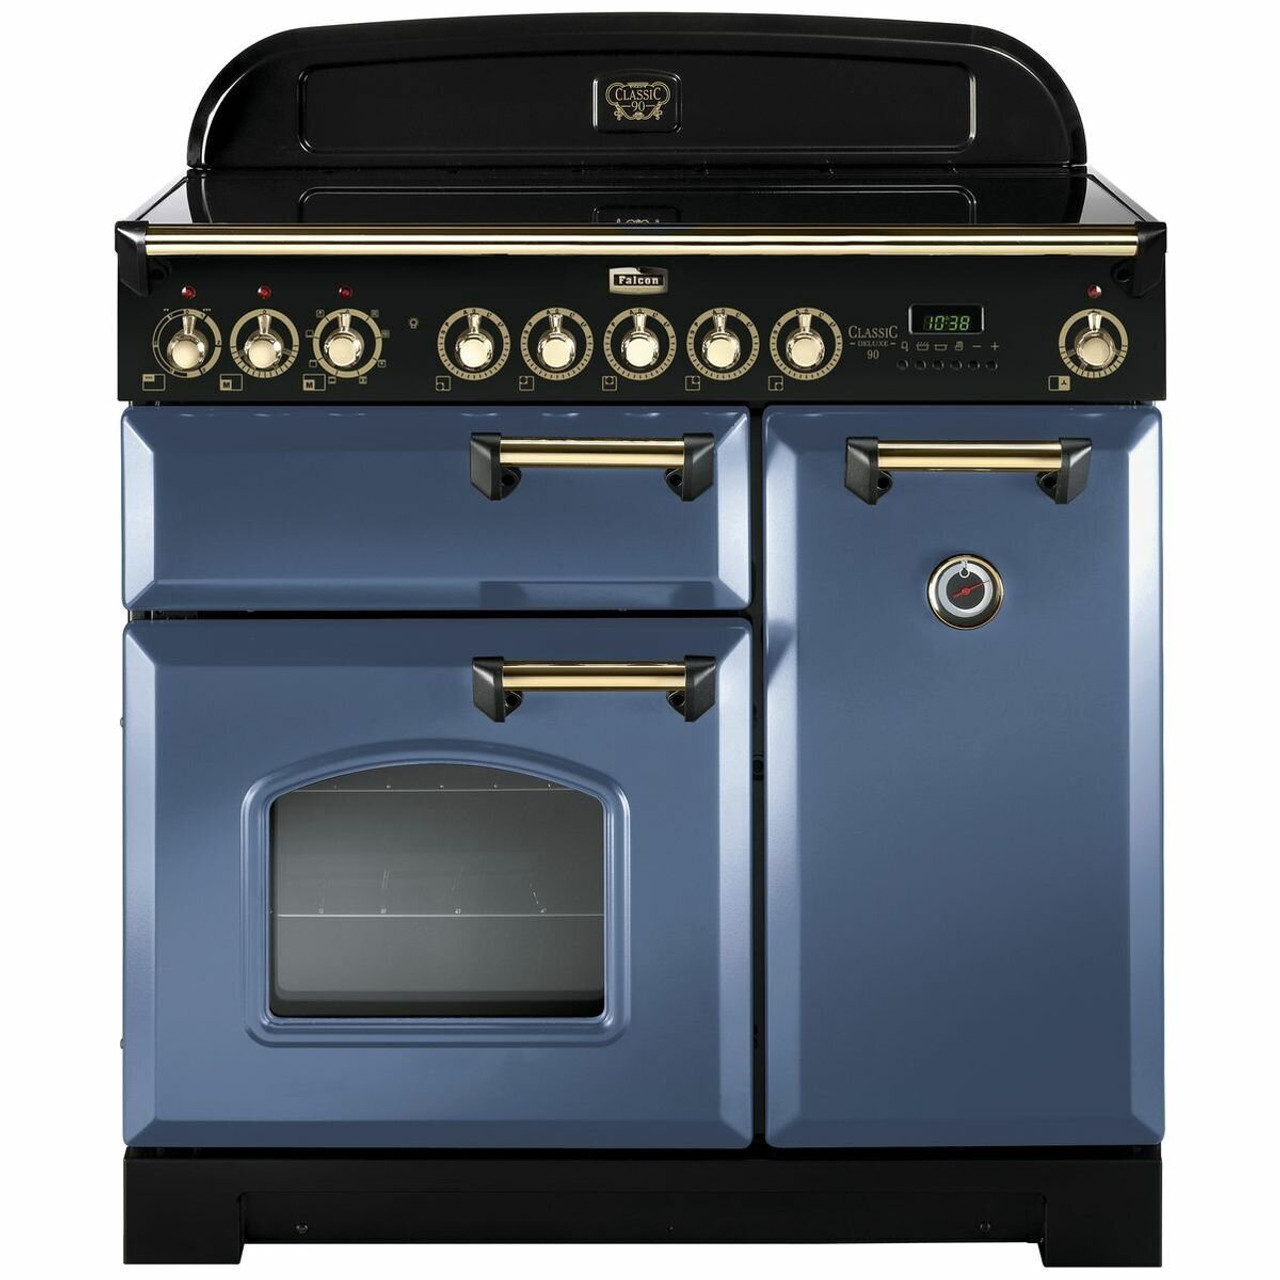 CDL90EISBBR - Classic Deluxe 90cm Freestanding Induction Oven/Stove - Blue